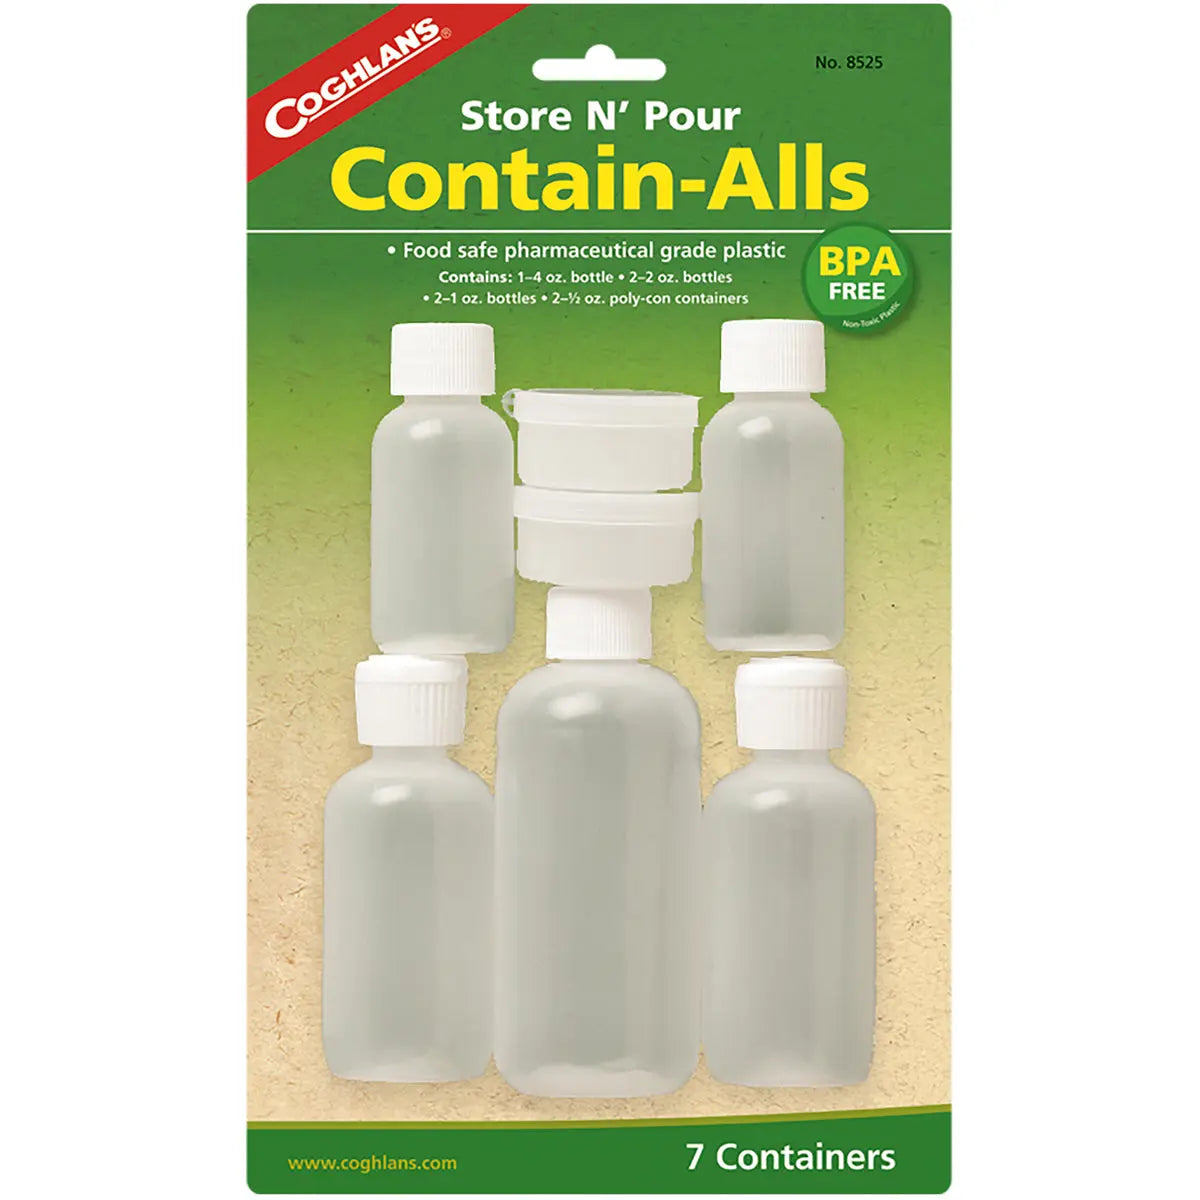 Coghlan's Store N' Pour Contain-Alls (7 Pack), Reusable Bottles and Containers Coghlan's